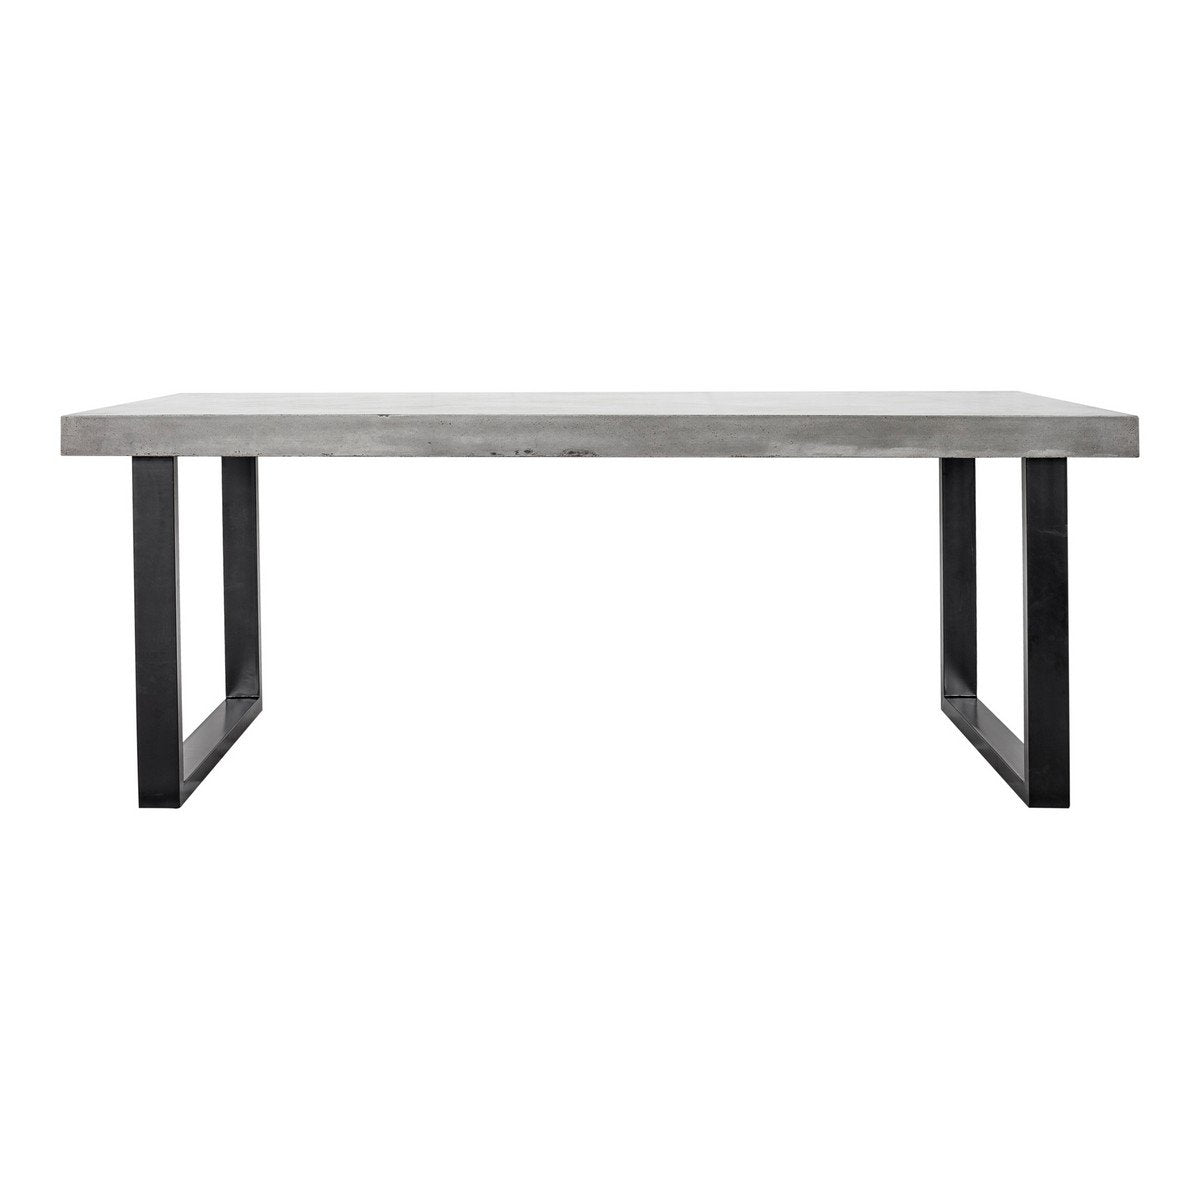 Moe's Home Collection Jedrik Outdoor Dining Table Large - BQ-1018-25 - Moe's Home Collection - Dining Tables - Minimal And Modern - 1